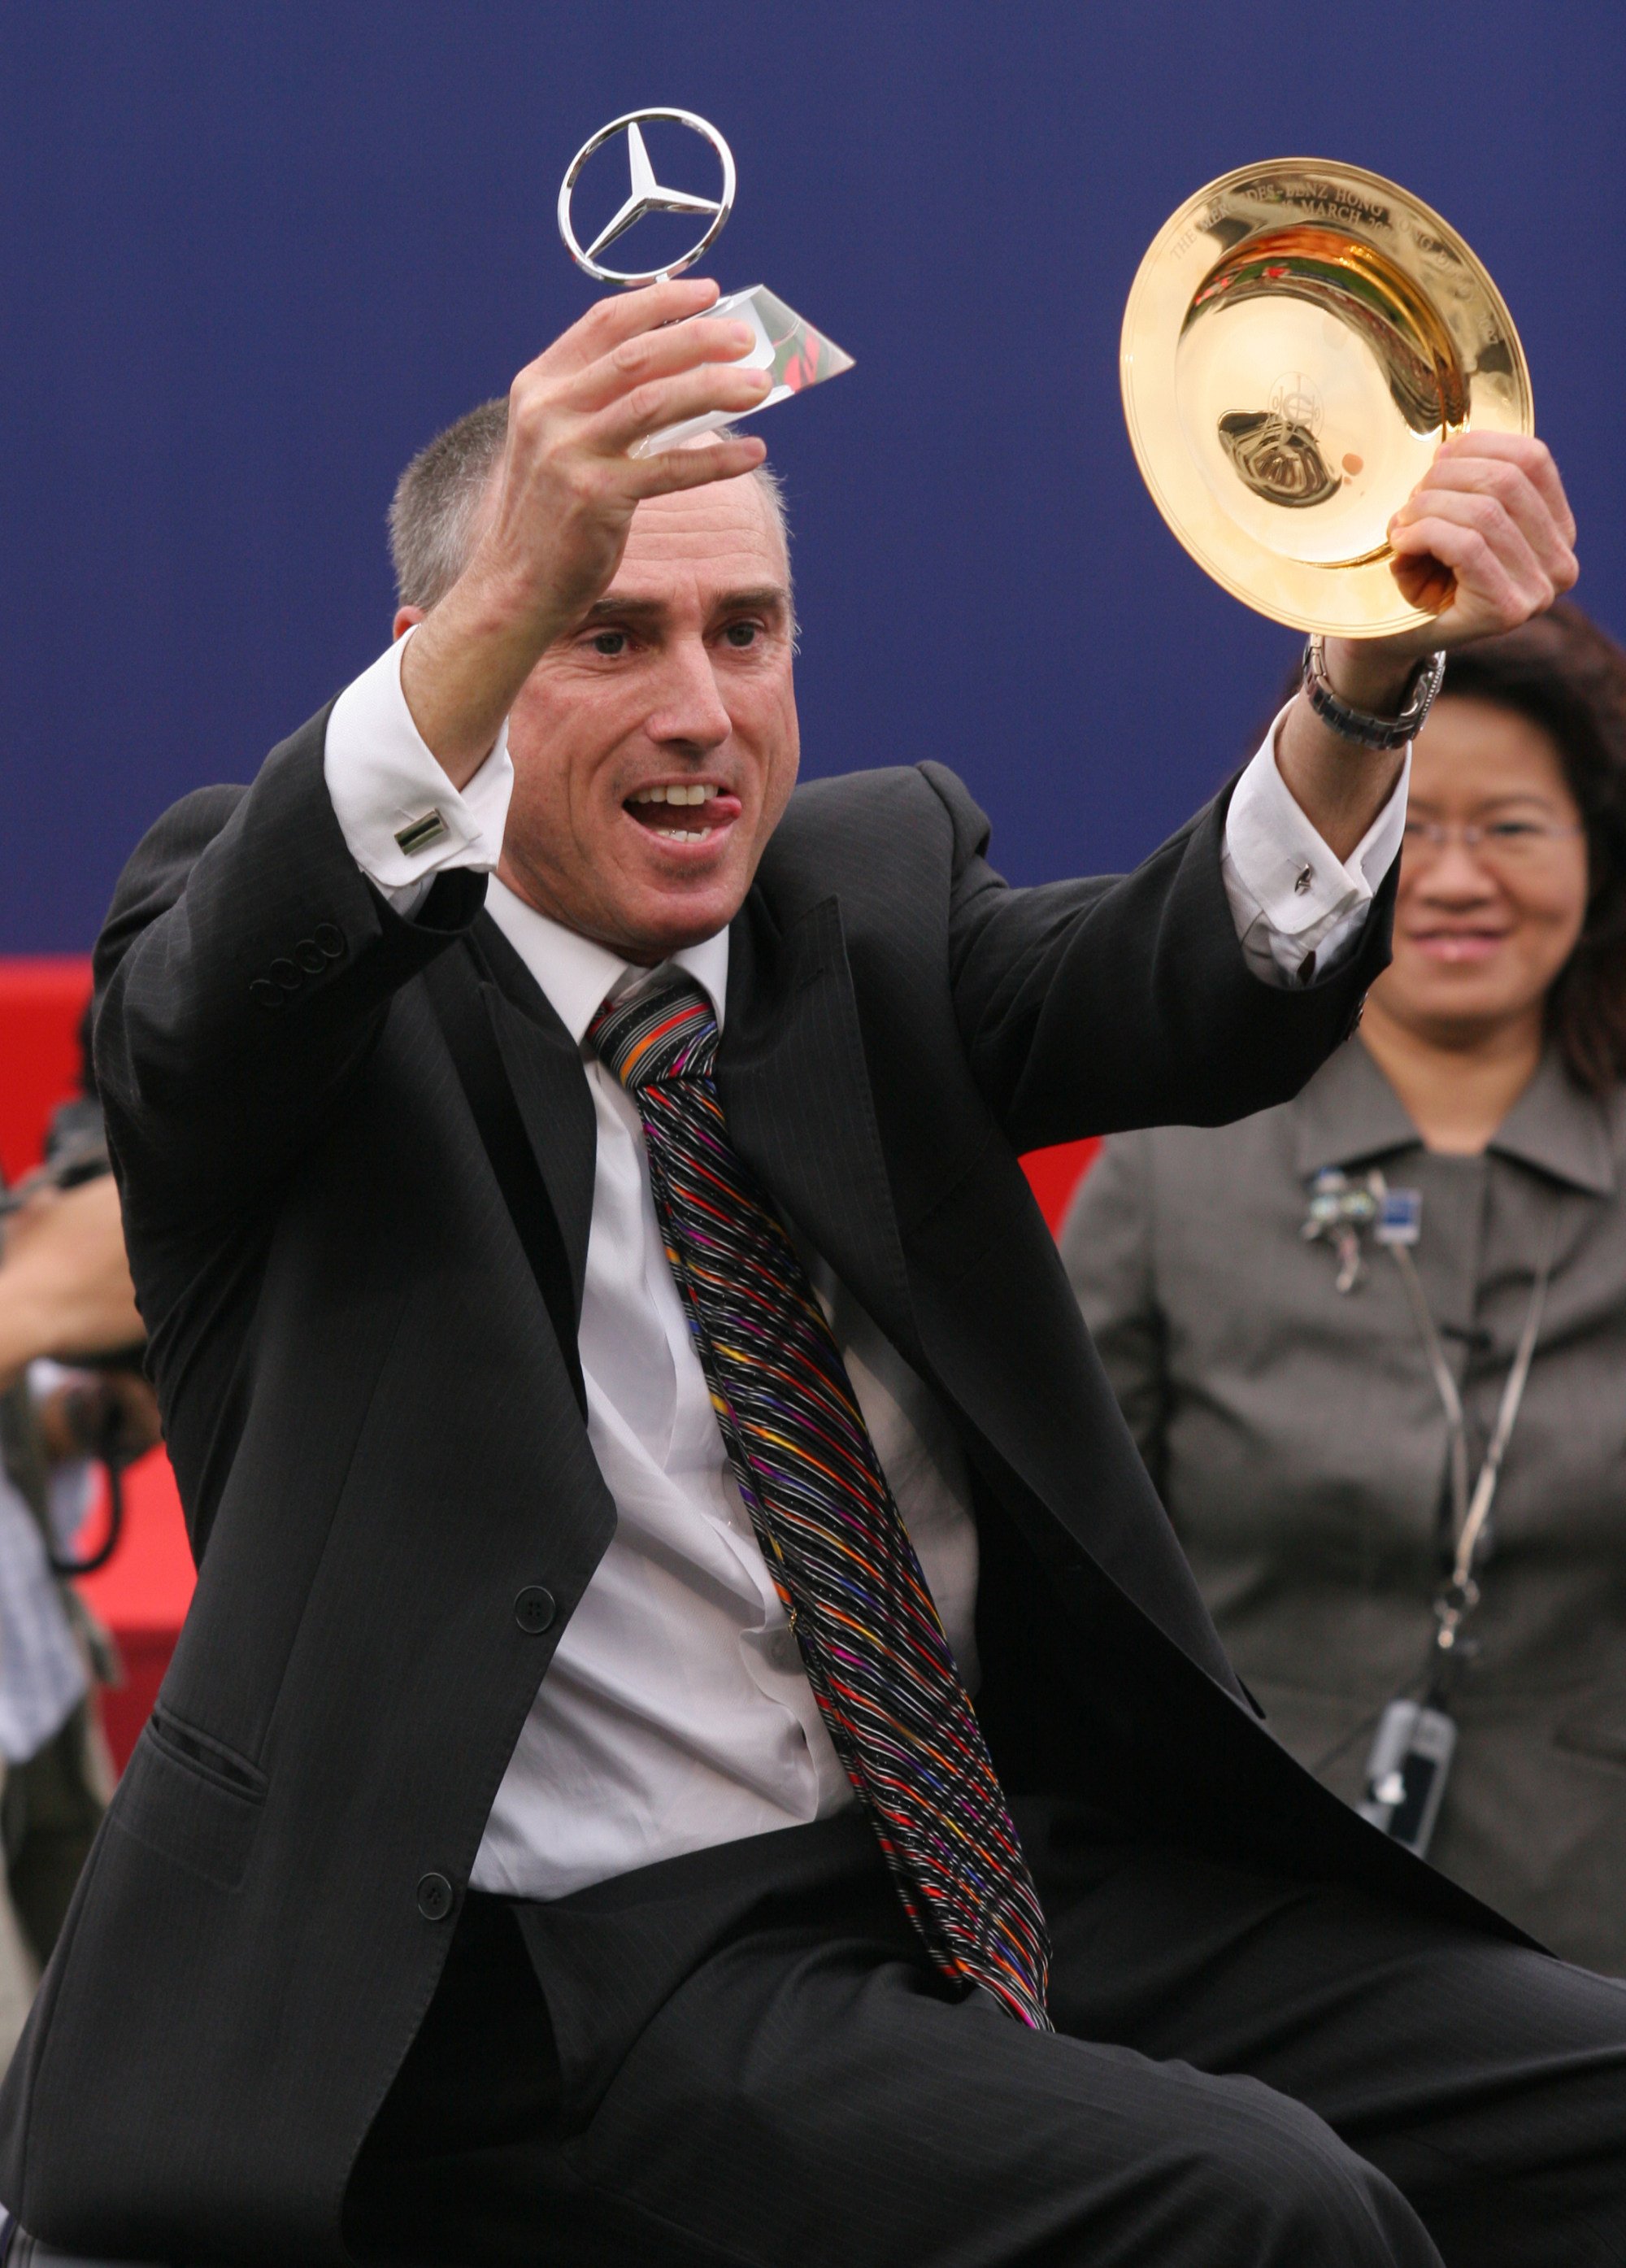 Paul O’Sullivan celebrates after winning the 2007 Hong Kong Derby with Vital King.